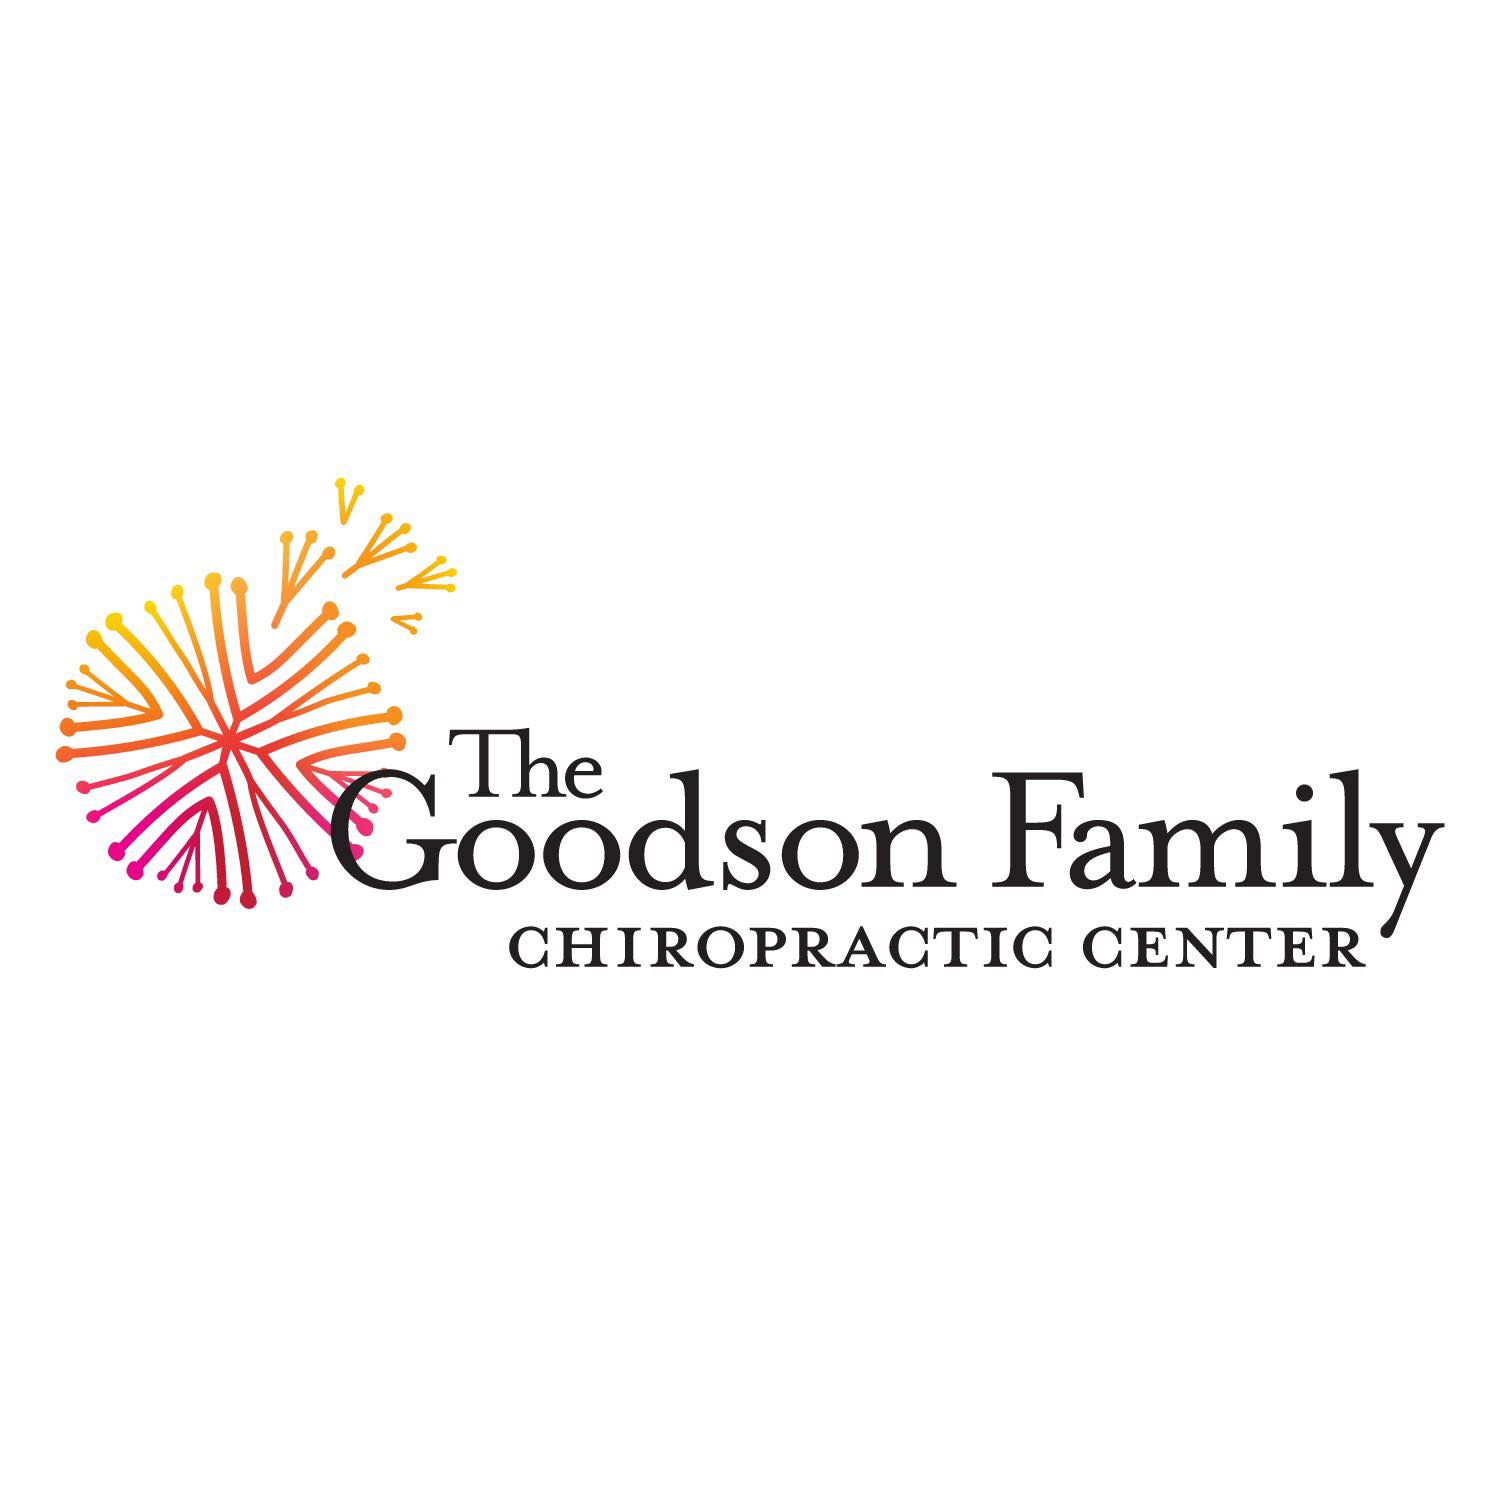 The Goodson Family Chiropractic Center